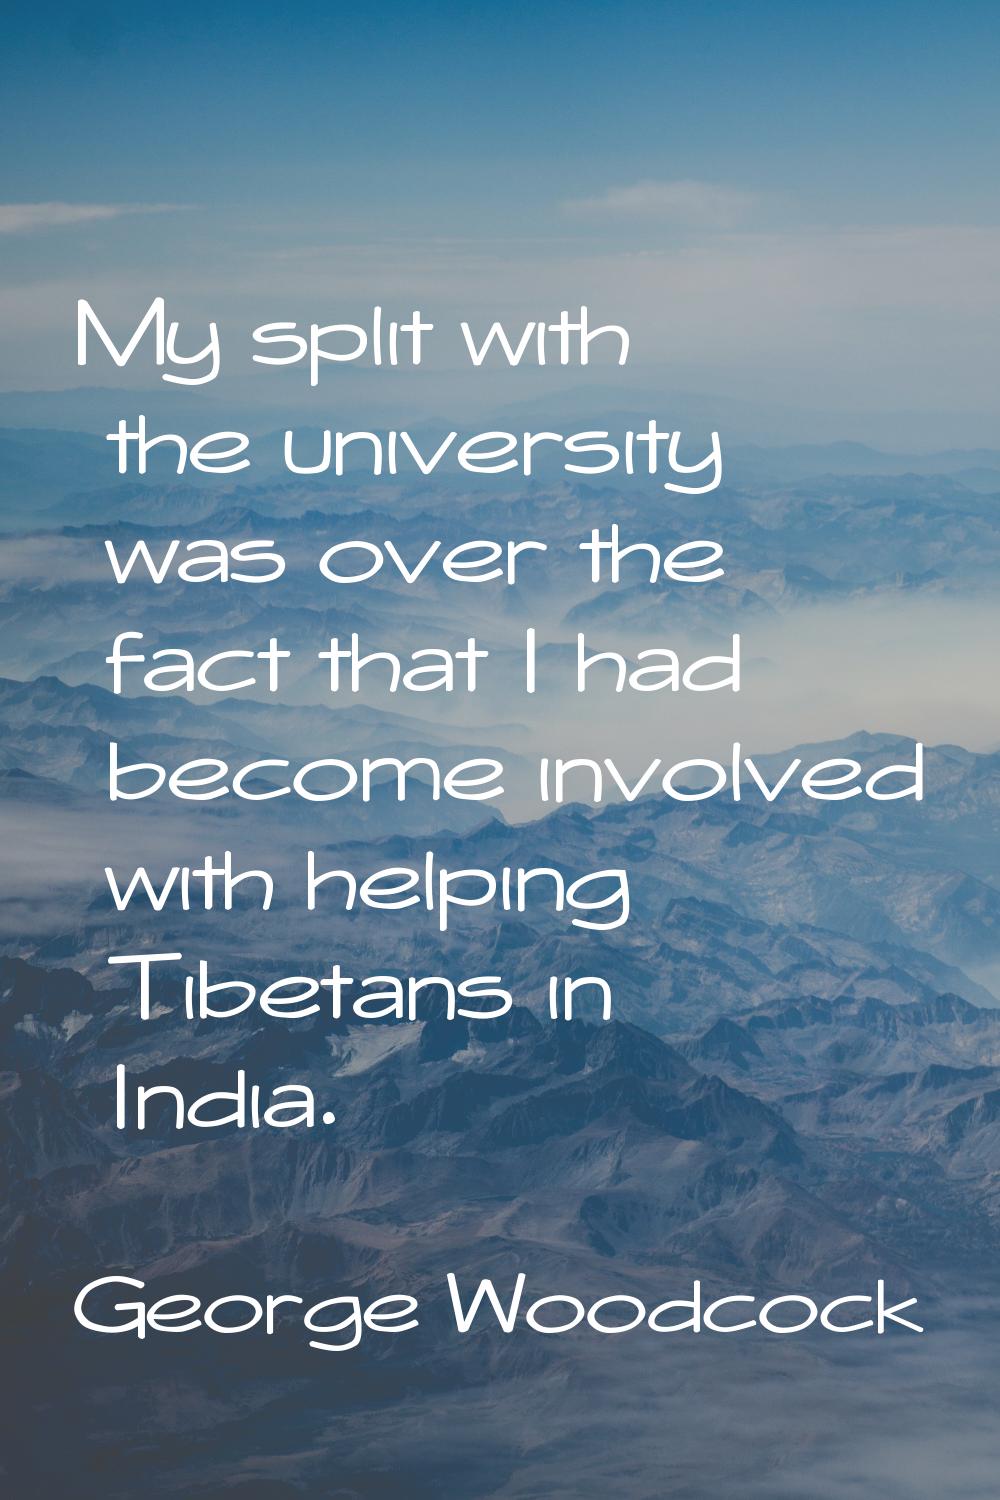 My split with the university was over the fact that I had become involved with helping Tibetans in 